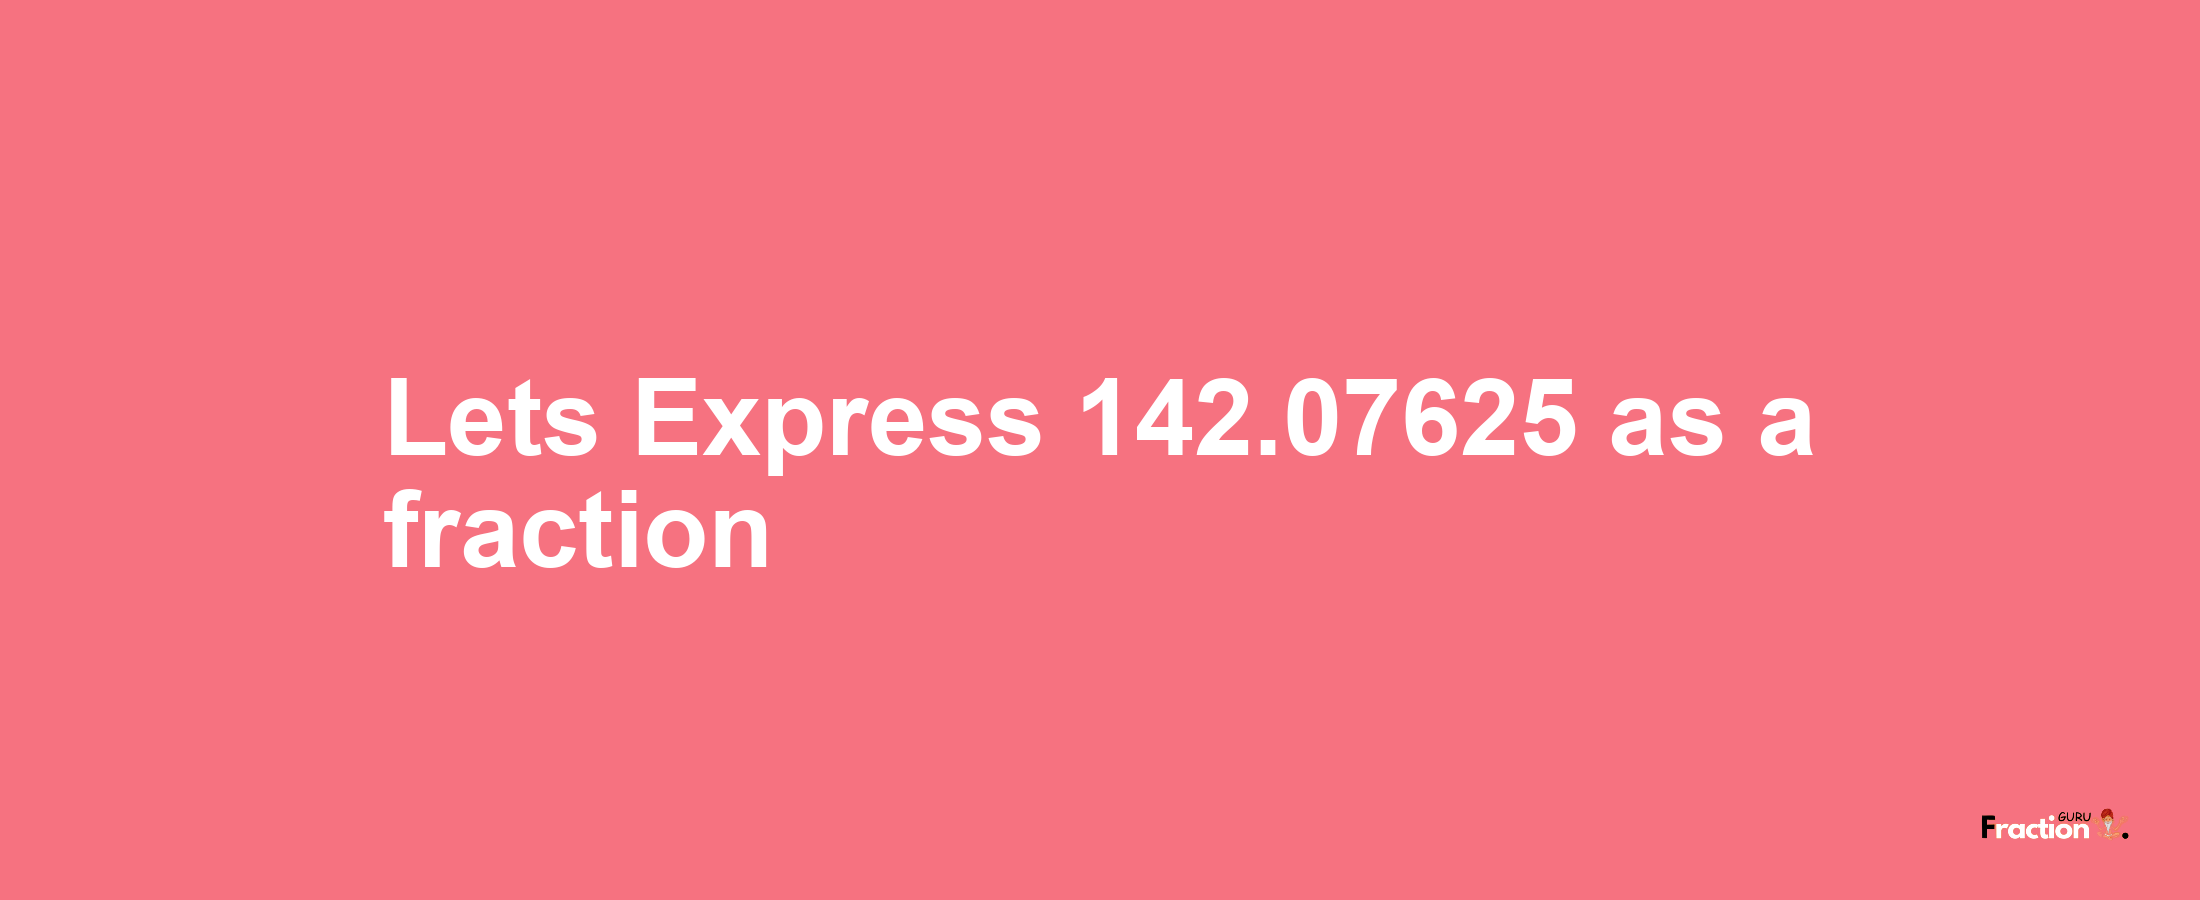 Lets Express 142.07625 as afraction